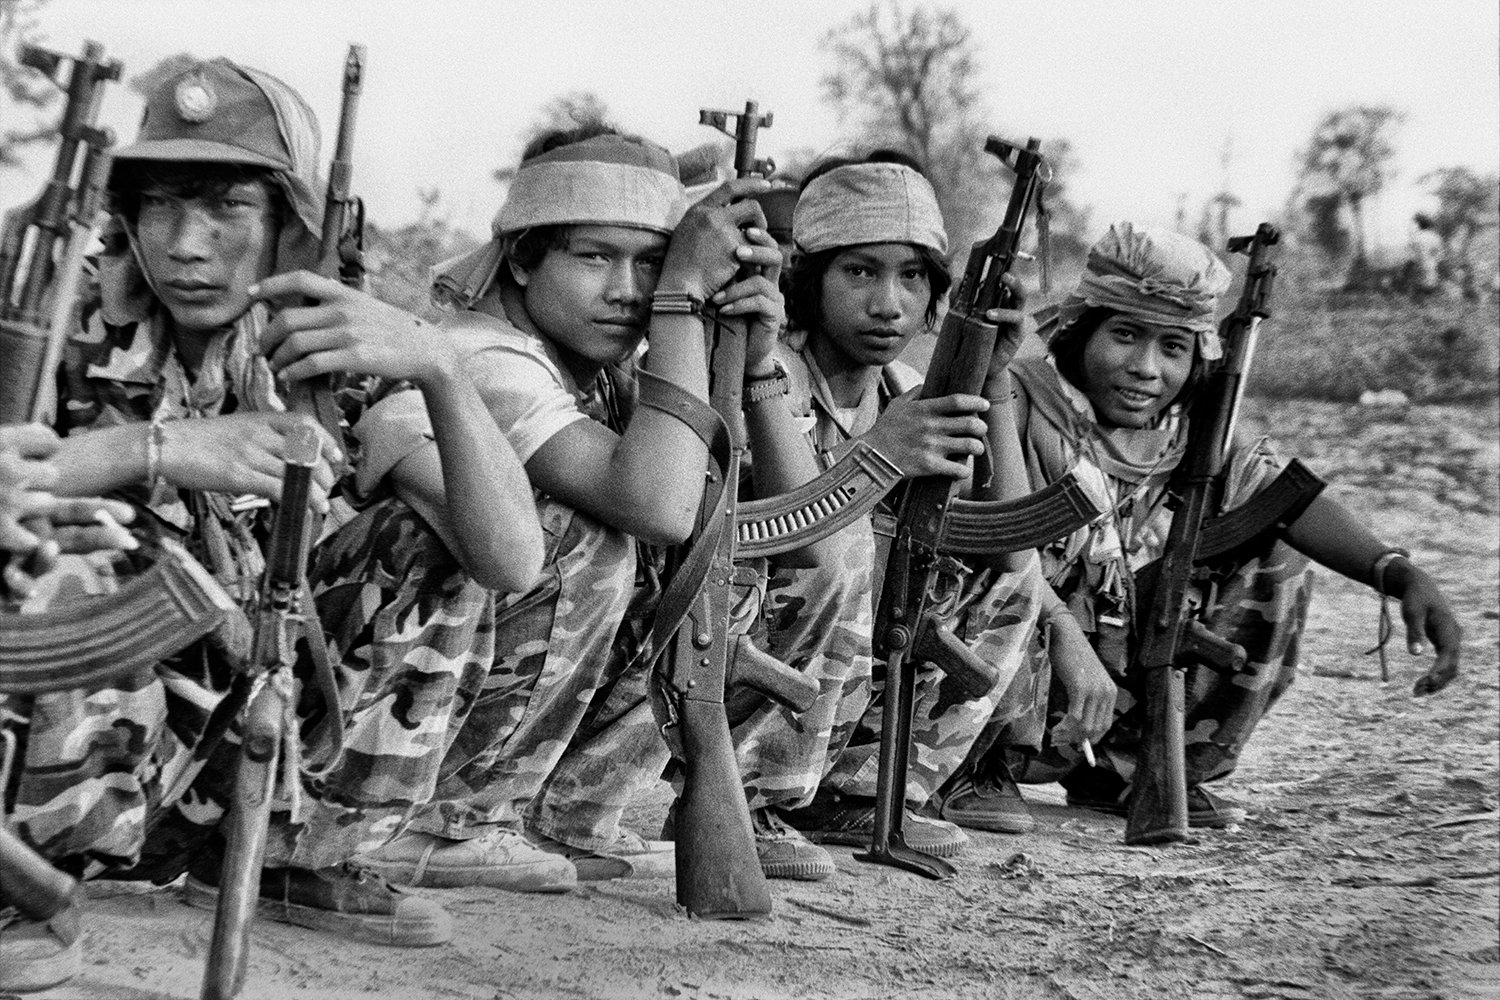 A group of young Khmer Serei anti-communist soldiers in Cambodia with guns circa 1979 Photography Pierre Toutain-Dorbec.jpg